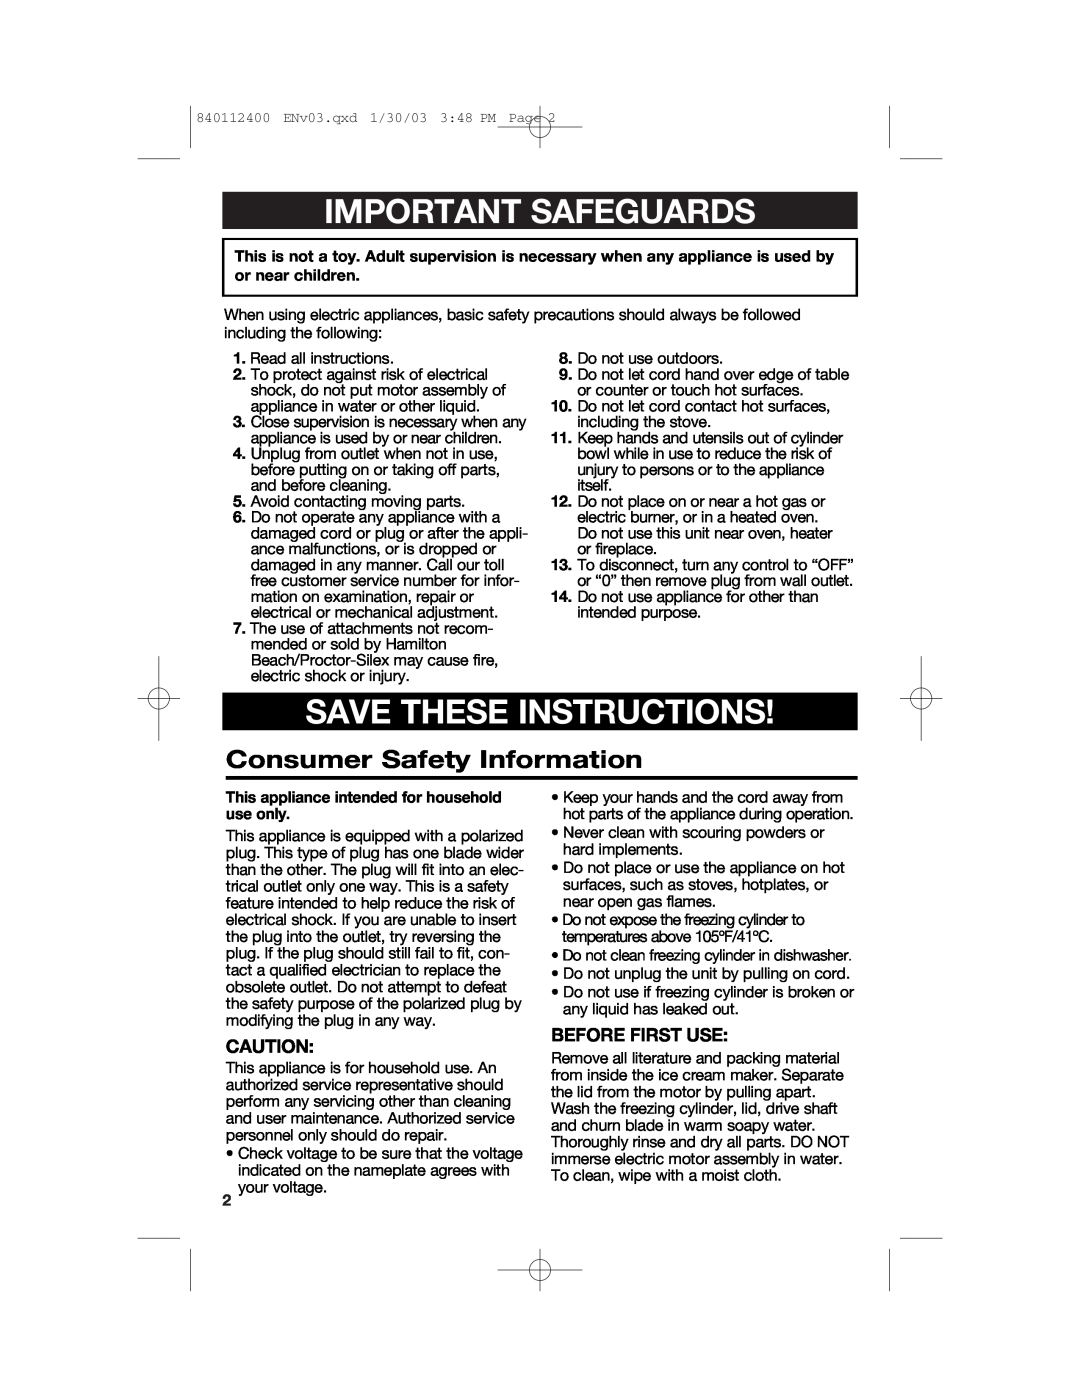 Hamilton Beach 68120 manual Important Safeguards, Save These Instructions, Consumer Safety Information, Before First Use 